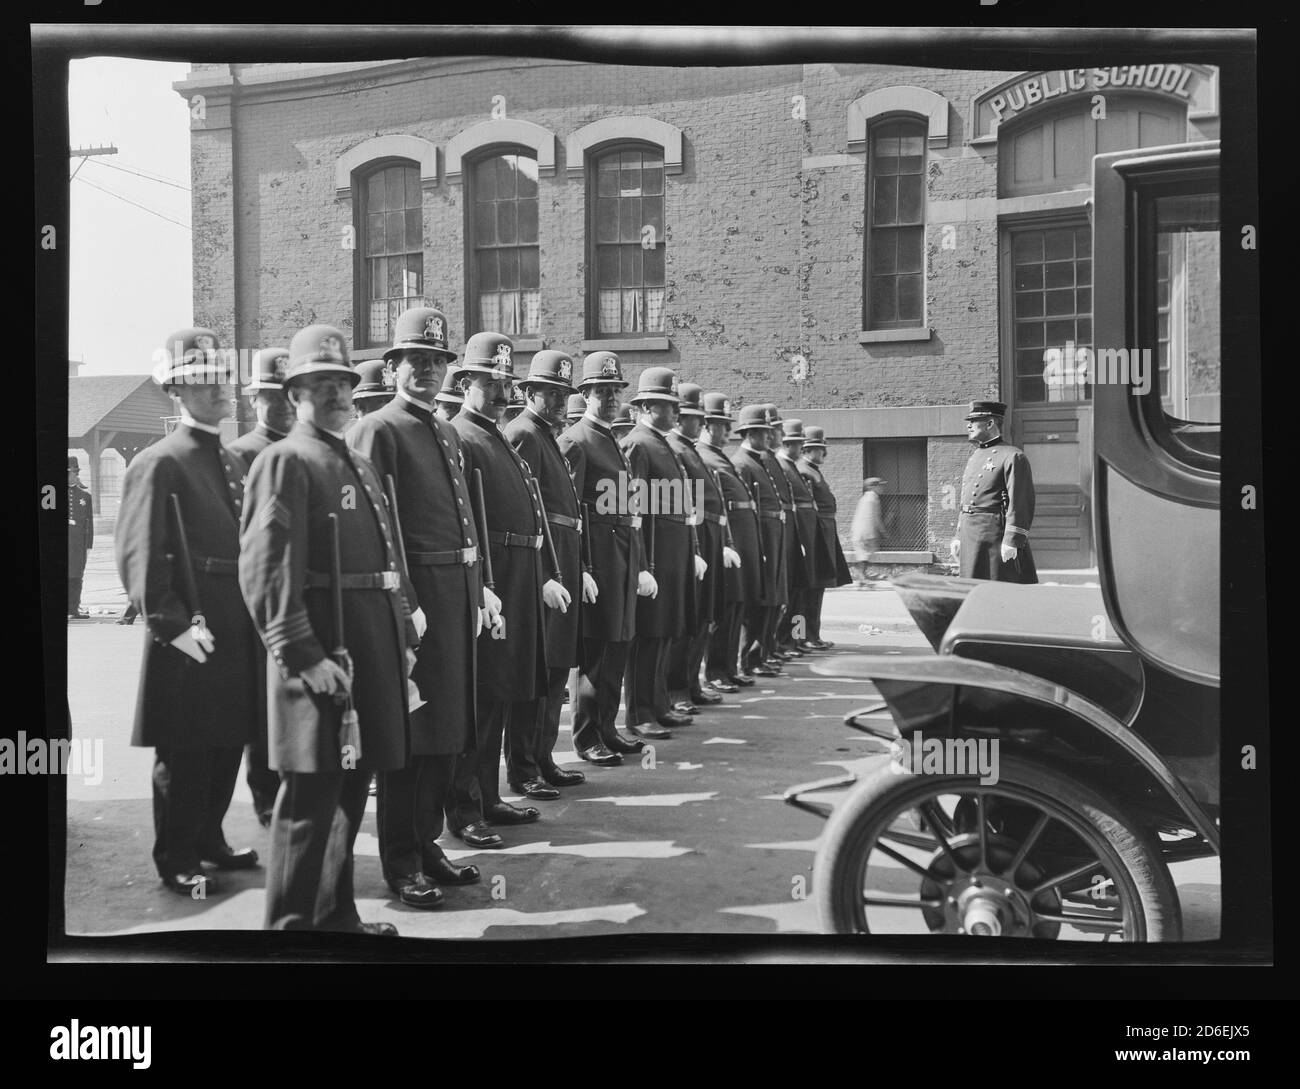 Inspection of uniformed Chicago police officers standing in front of an unidentified public school, Chicago, Illinois, 1911. Stock Photo